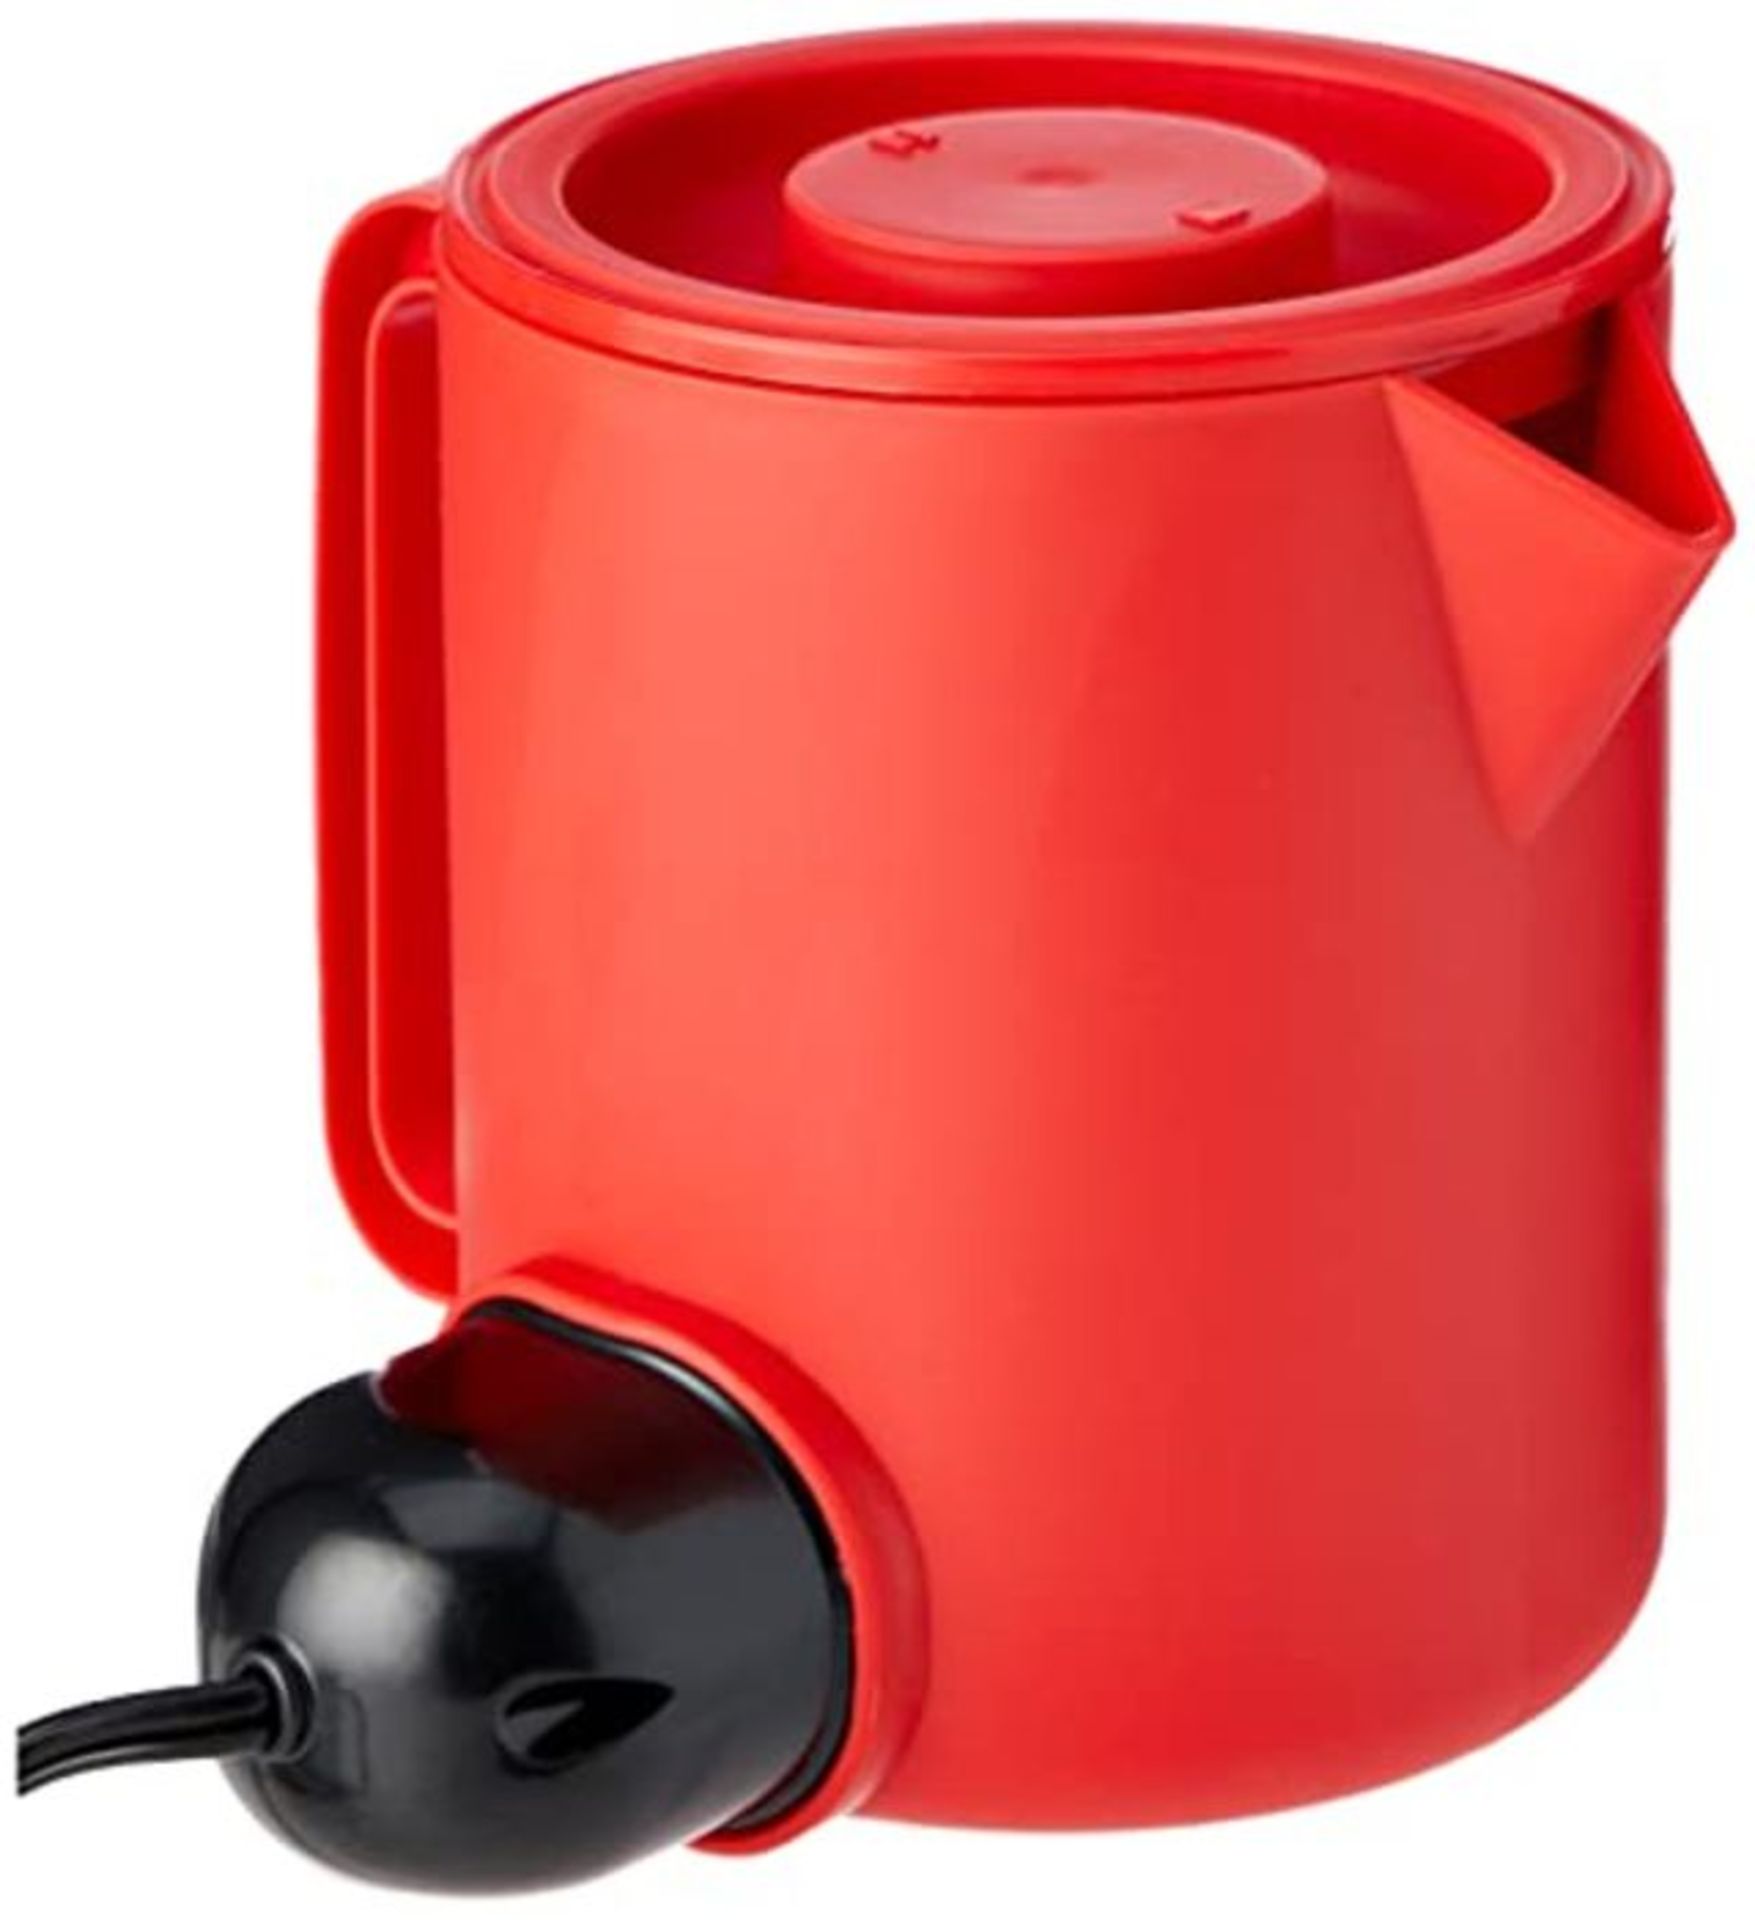 The Classic Big Red 24v MKII Kettle with Hella Plug